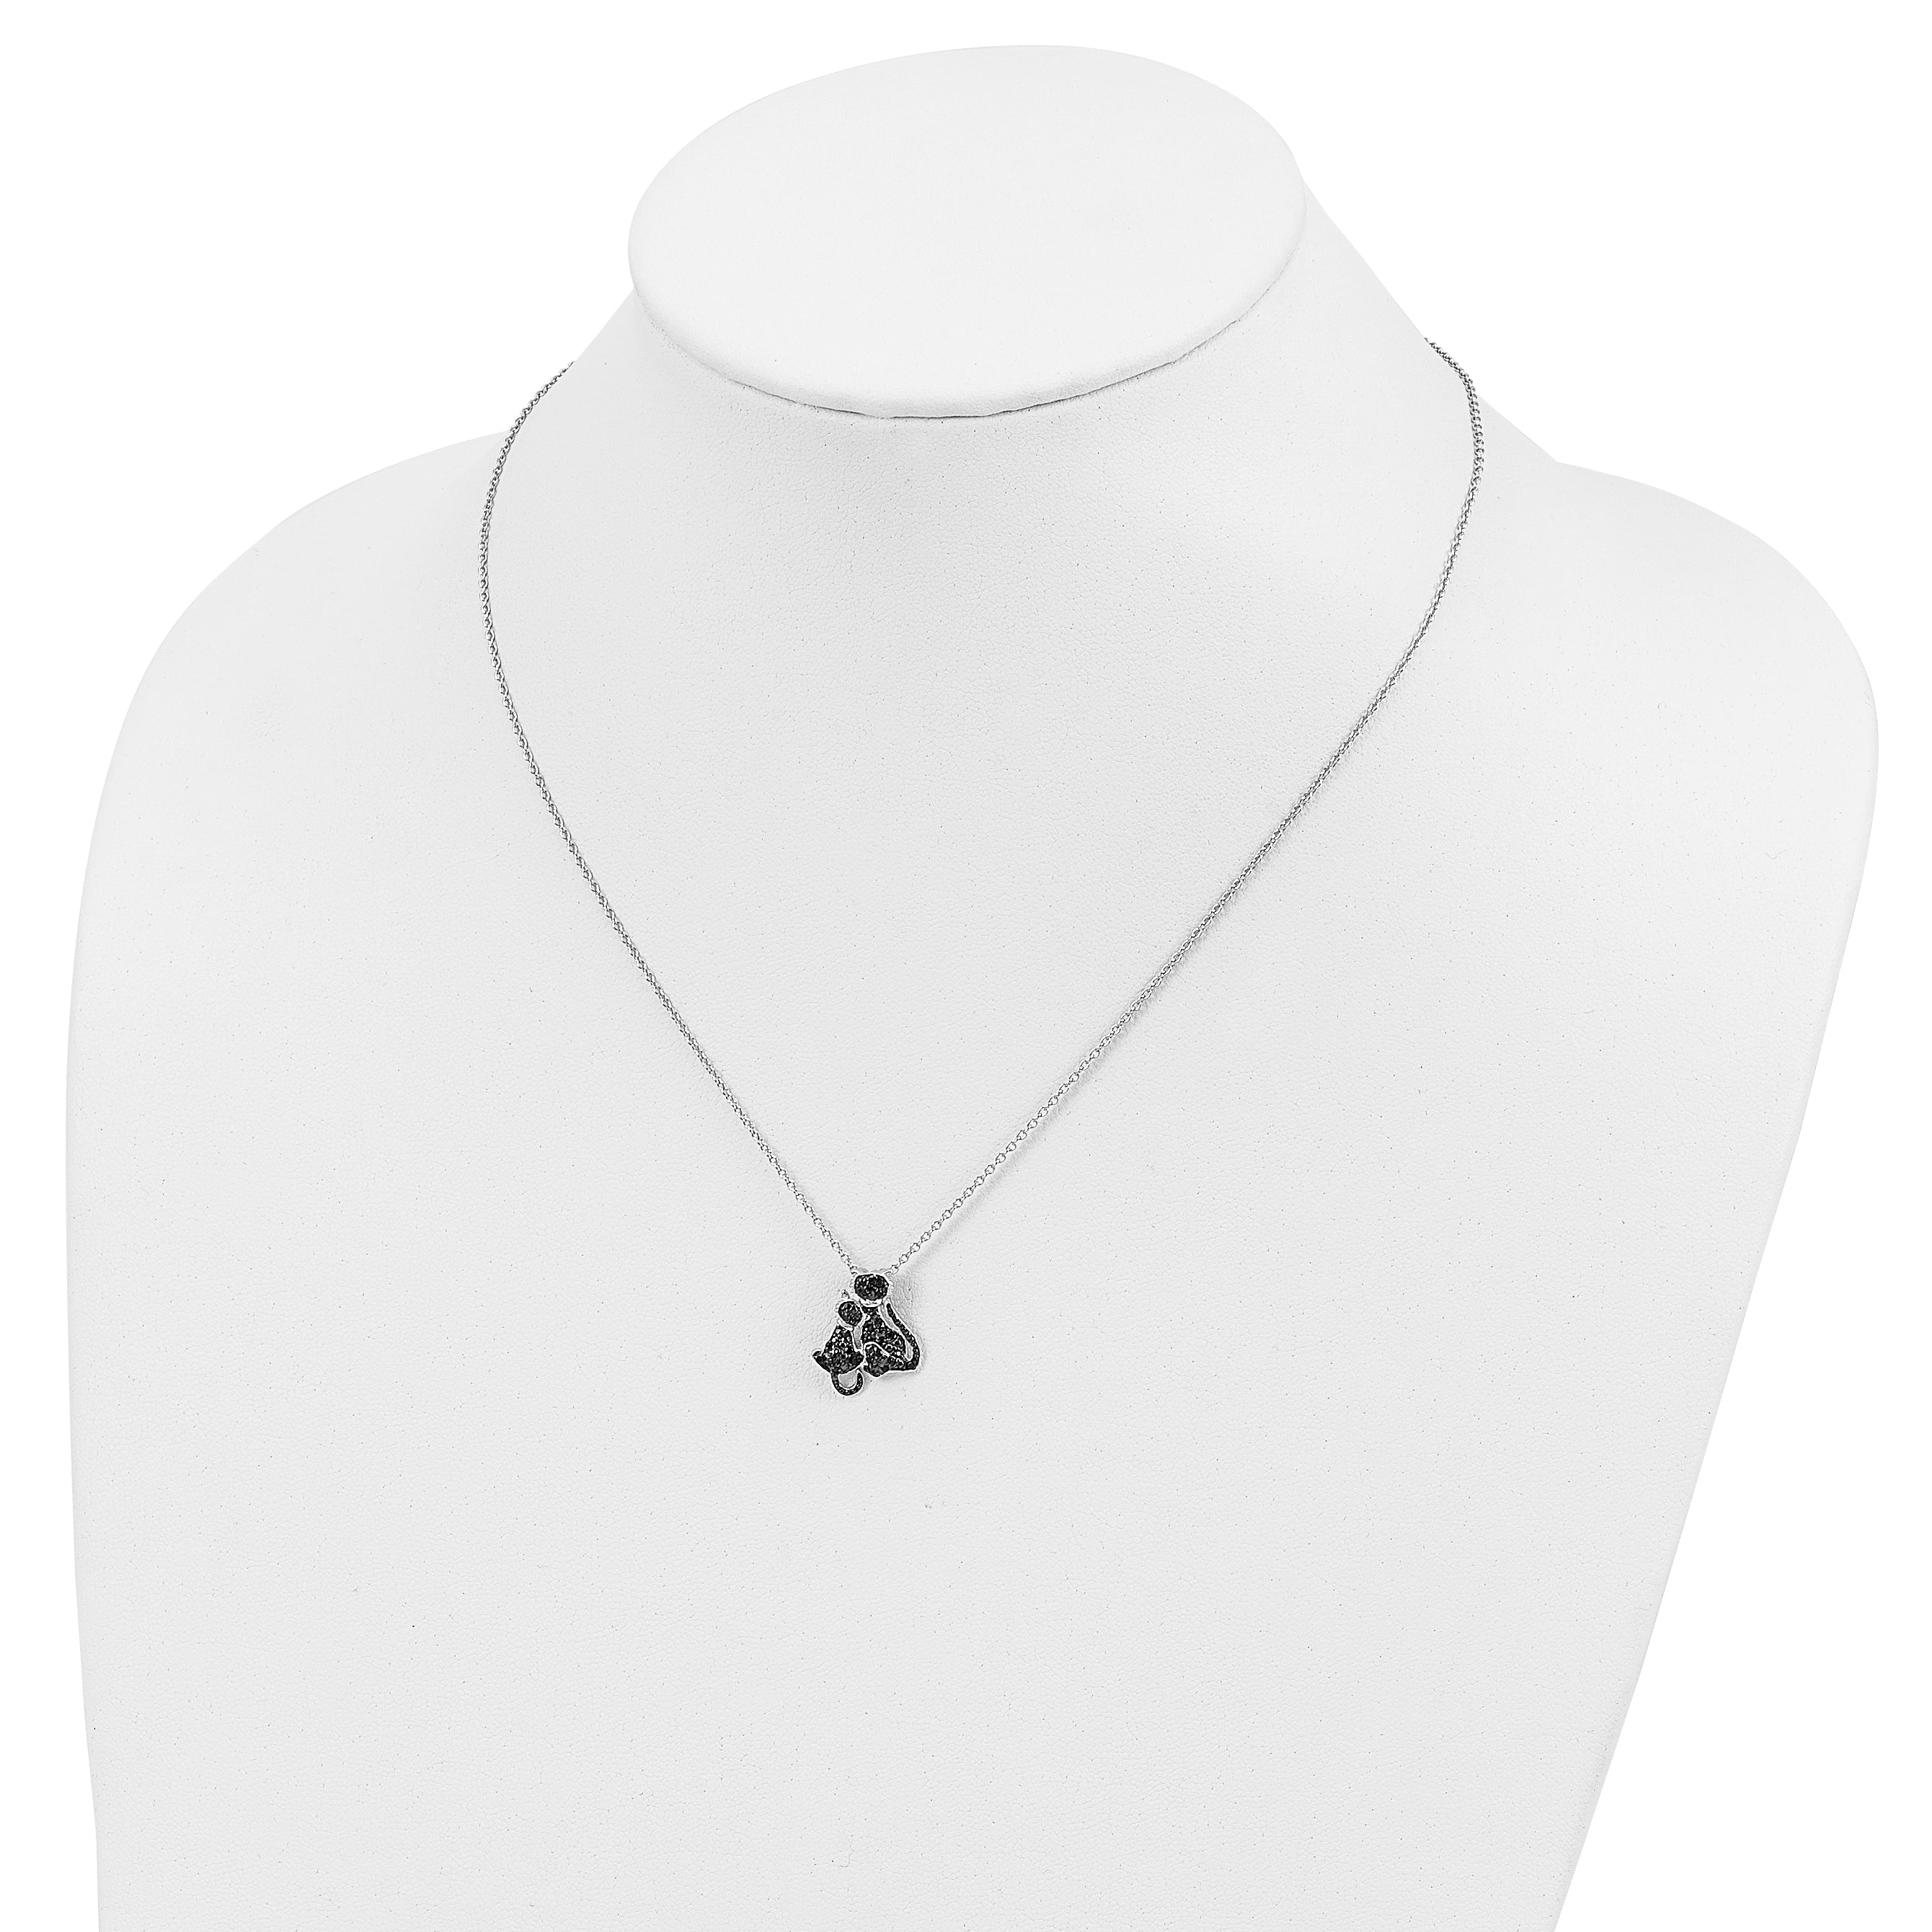 Cheryl M Sterling Silver Rhodium-plated with Black Rhodium Accent Brilliant-cut Black CZ Cats 18 Inch Necklace